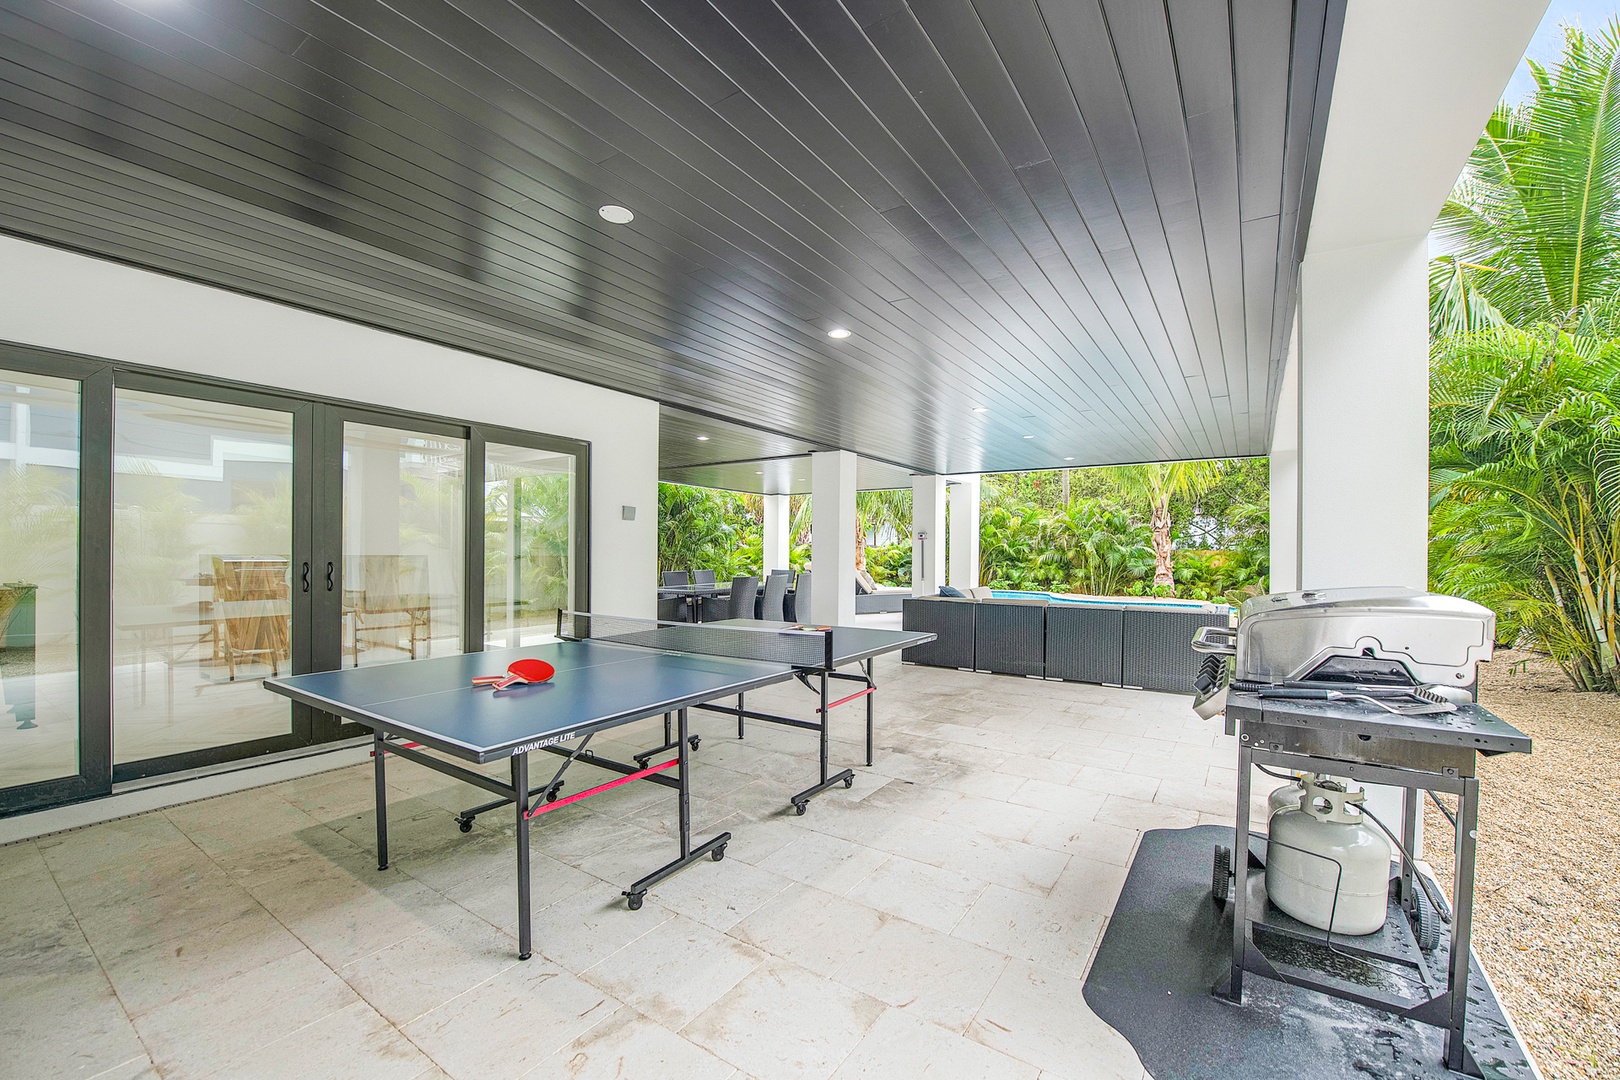 Ping Pong Table and BBQ Grill